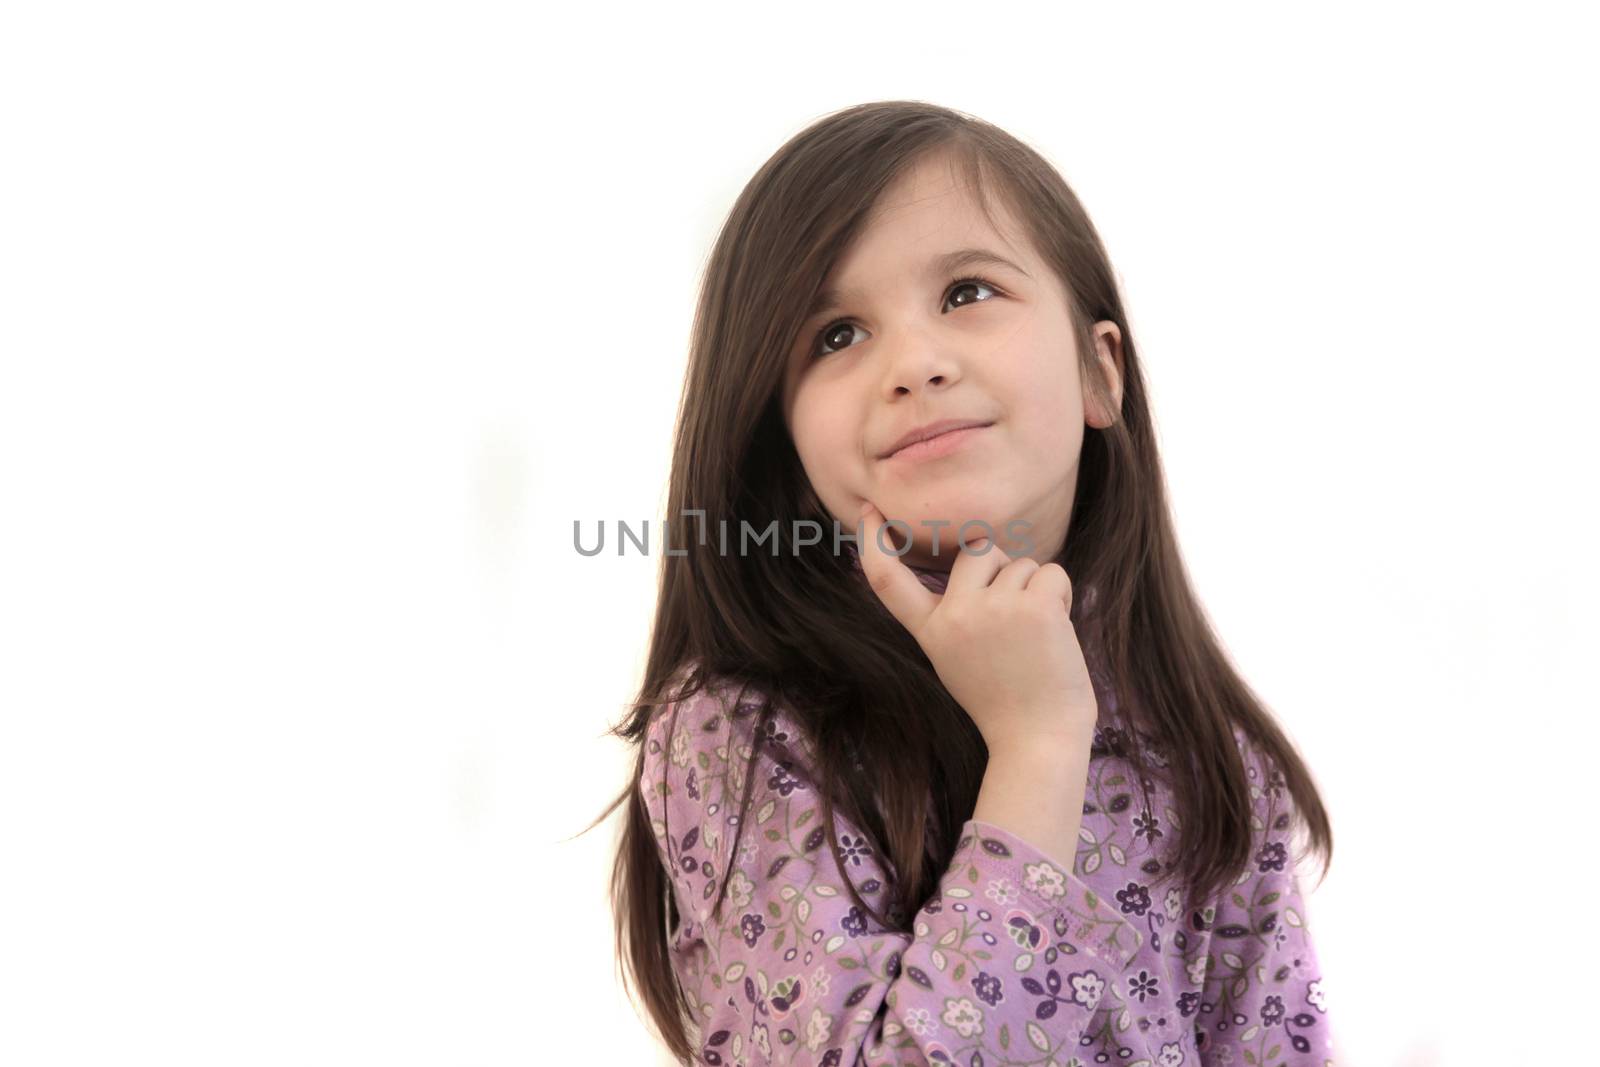 Pretty little brunette 6 year old girl thinking, looking up with finger to face on a white background and copyspace